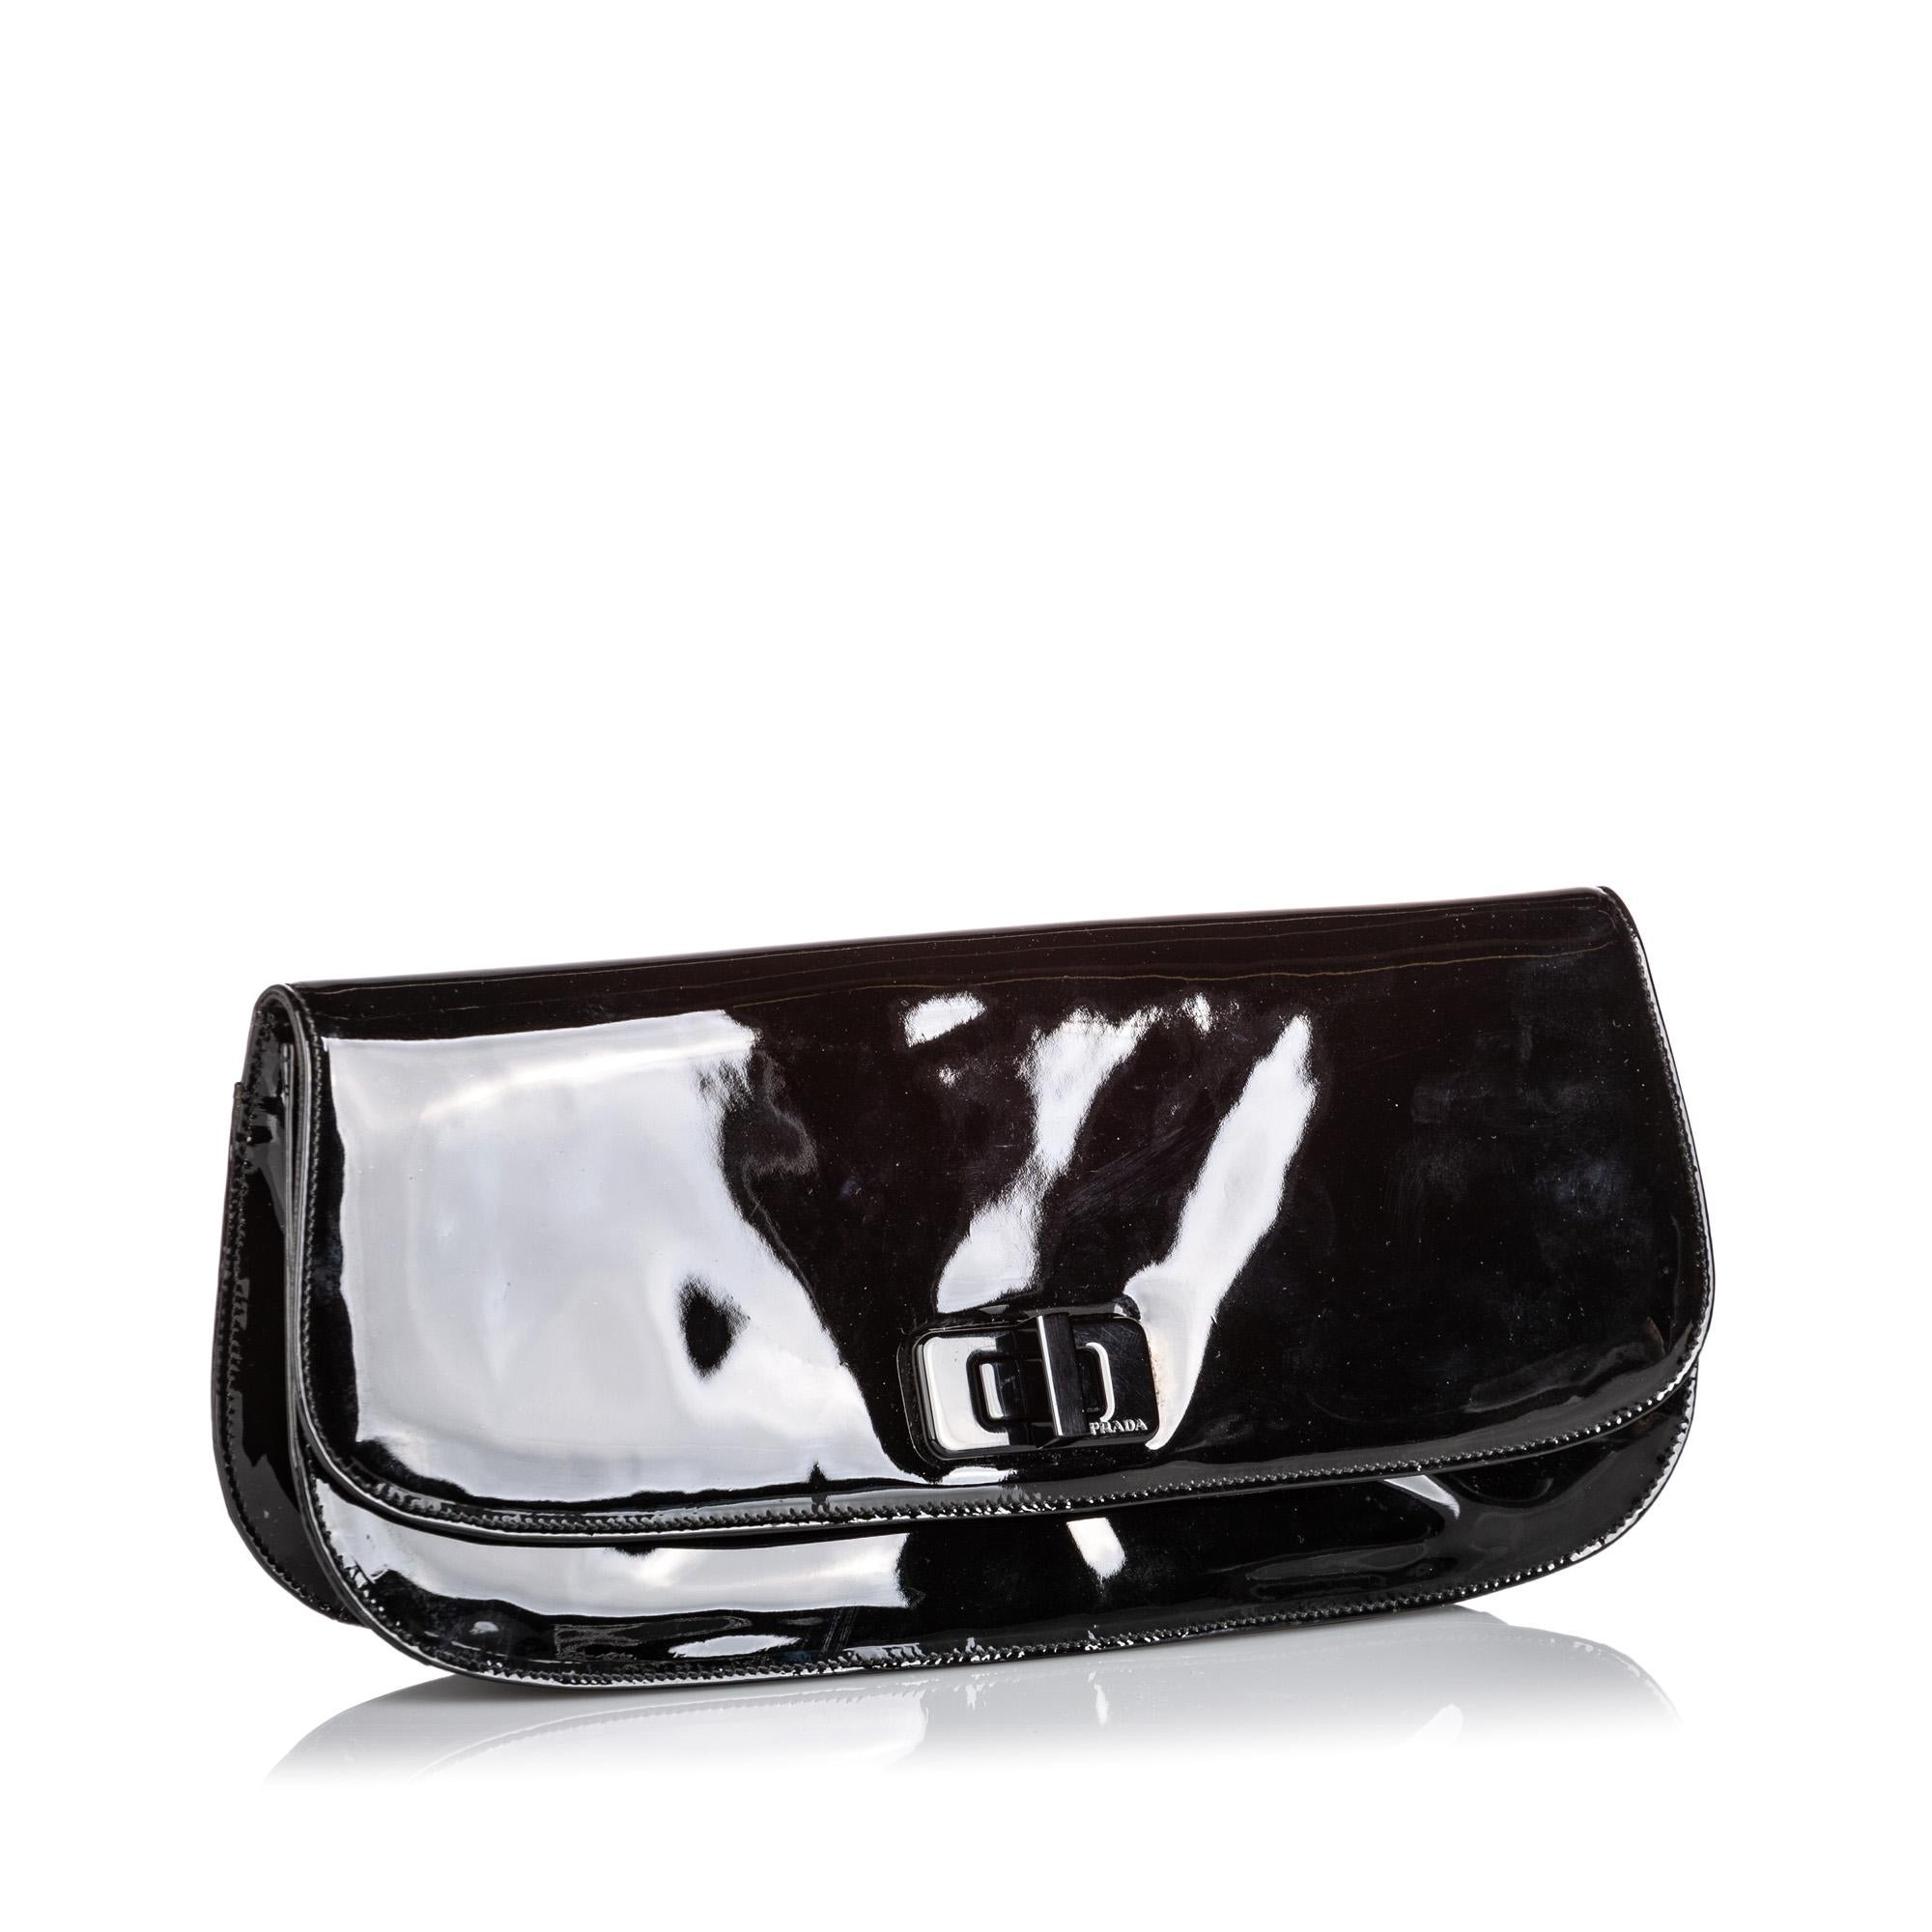 This clutch features a patent leather body, top flap with magnetic closure and interior zip and slip pockets. It carries as B condition rating.

Inclusions: 
Authenticity Card
Dimensions:
Length: 13.00 cm
Width: 30.00 cm
Depth: 7.00 cm

Material: